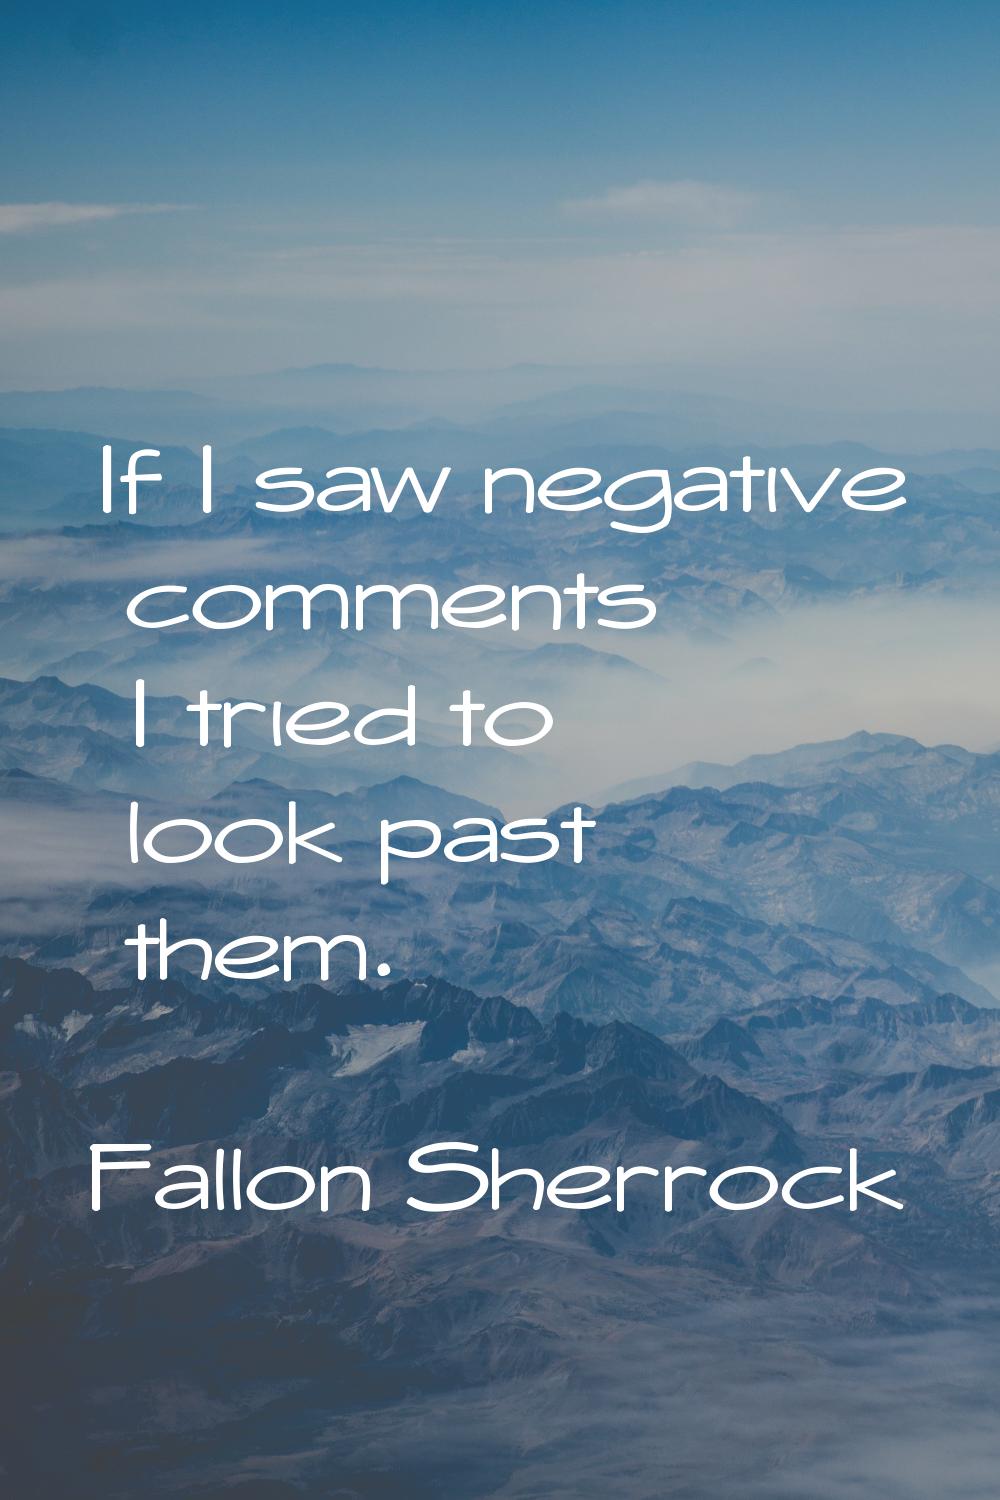 If I saw negative comments I tried to look past them.